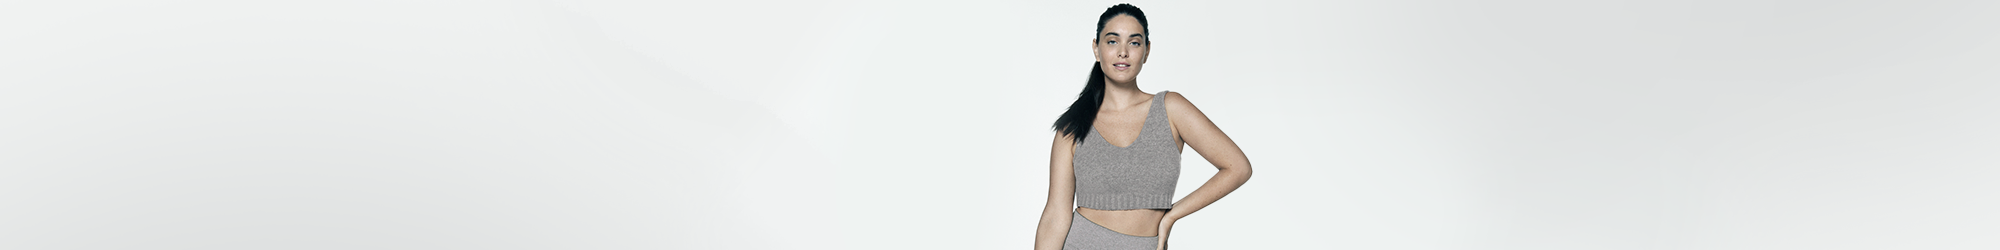 View of a female model with her hair pulled back and wearing a grey coloured knit top with her left hand pressed against her left hip.